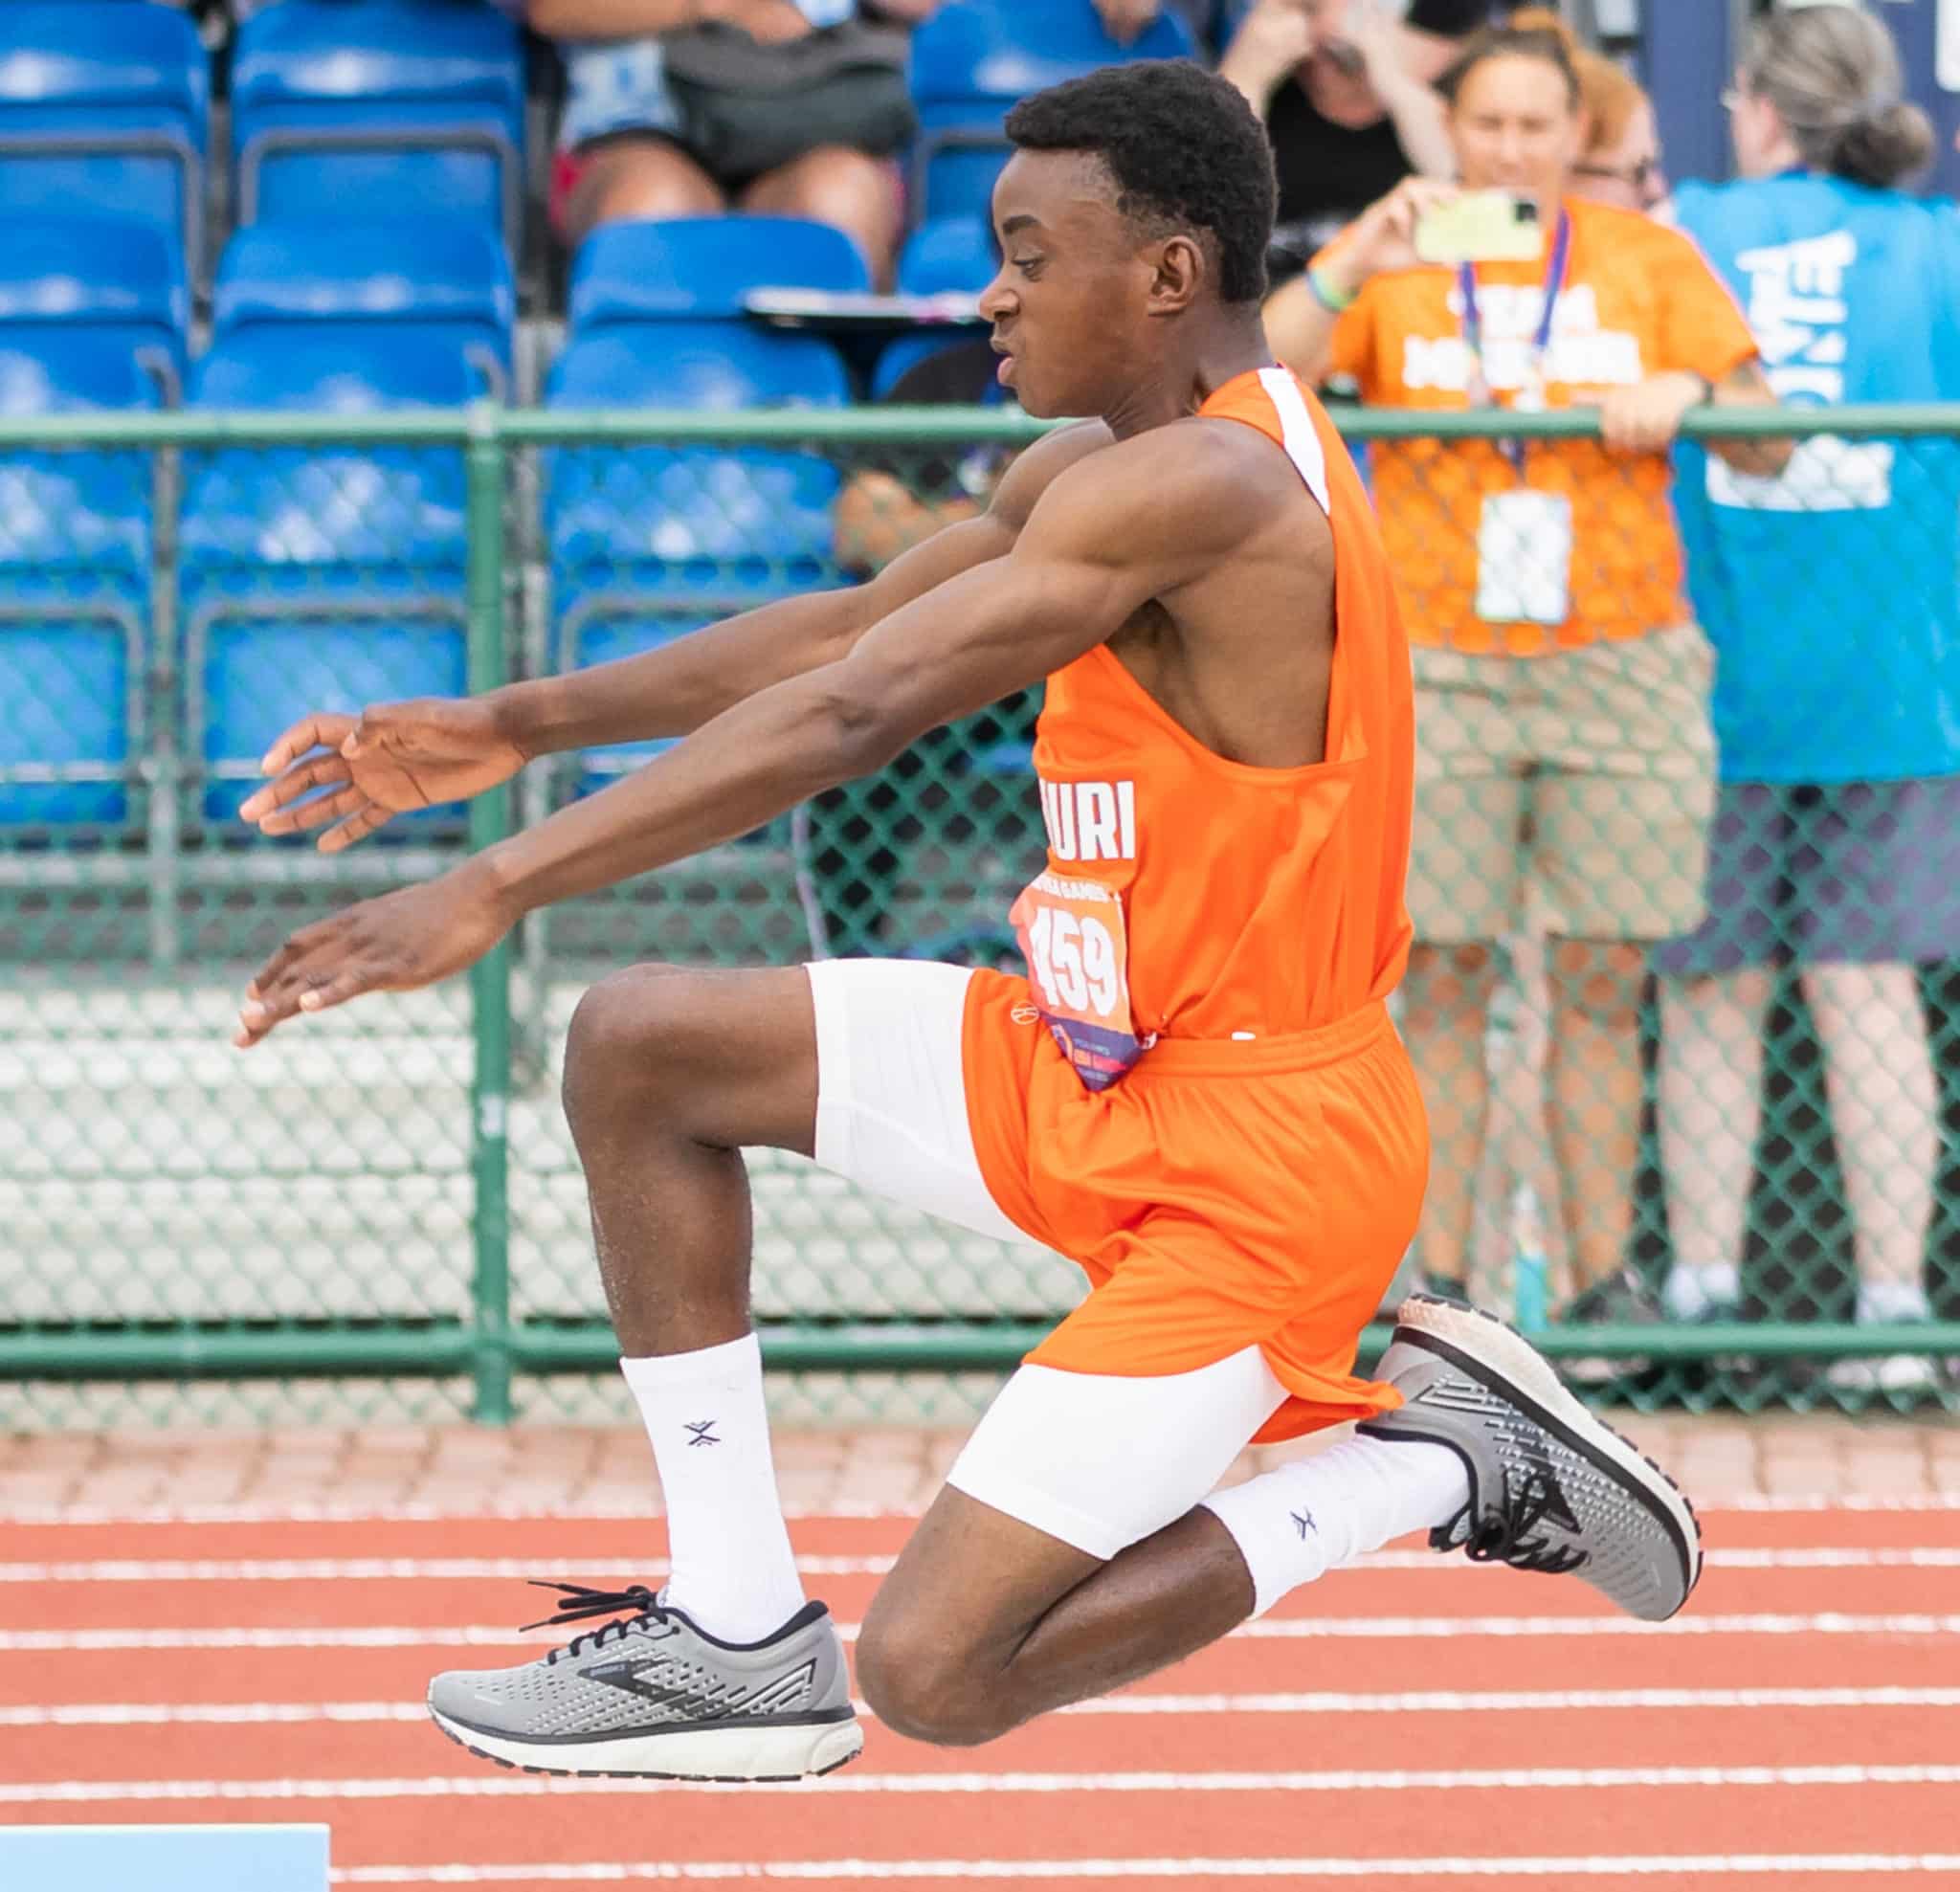 Special Olympics, USA Games, Athlete, Athletics, Jump, Action, Missouri, Male, Men's, Track, Long Jump, Distance